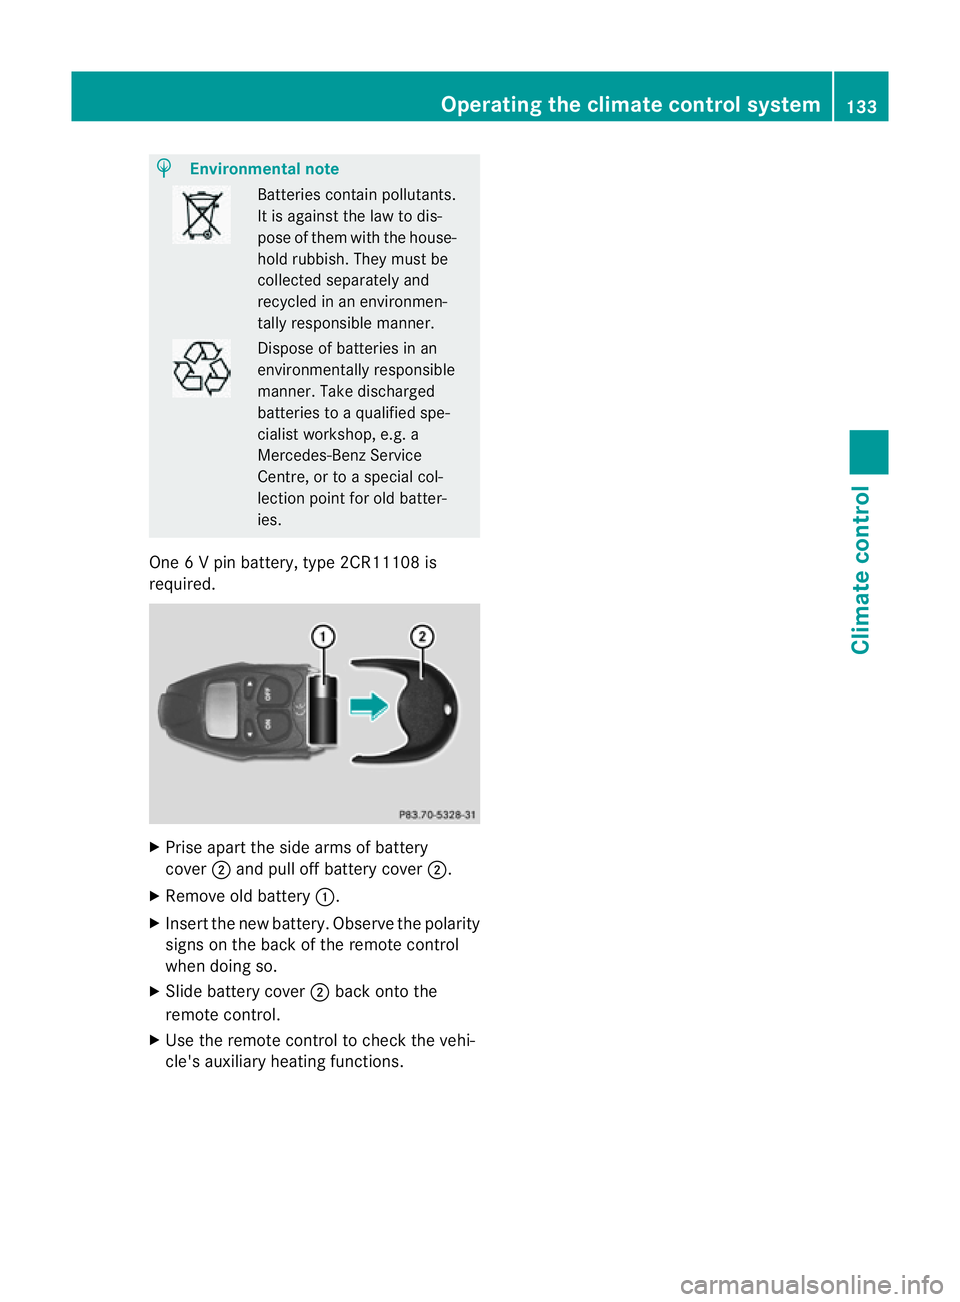 MERCEDES-BENZ M-CLASS SUV 2011  Owners Manual H
Environmenta
lnote Batteries contain pollutants.
It is agains
tthe law to dis-
pose of them with the house-
hold rubbish. They must be
collected separatel yand
recycled in an environmen-
tally respo